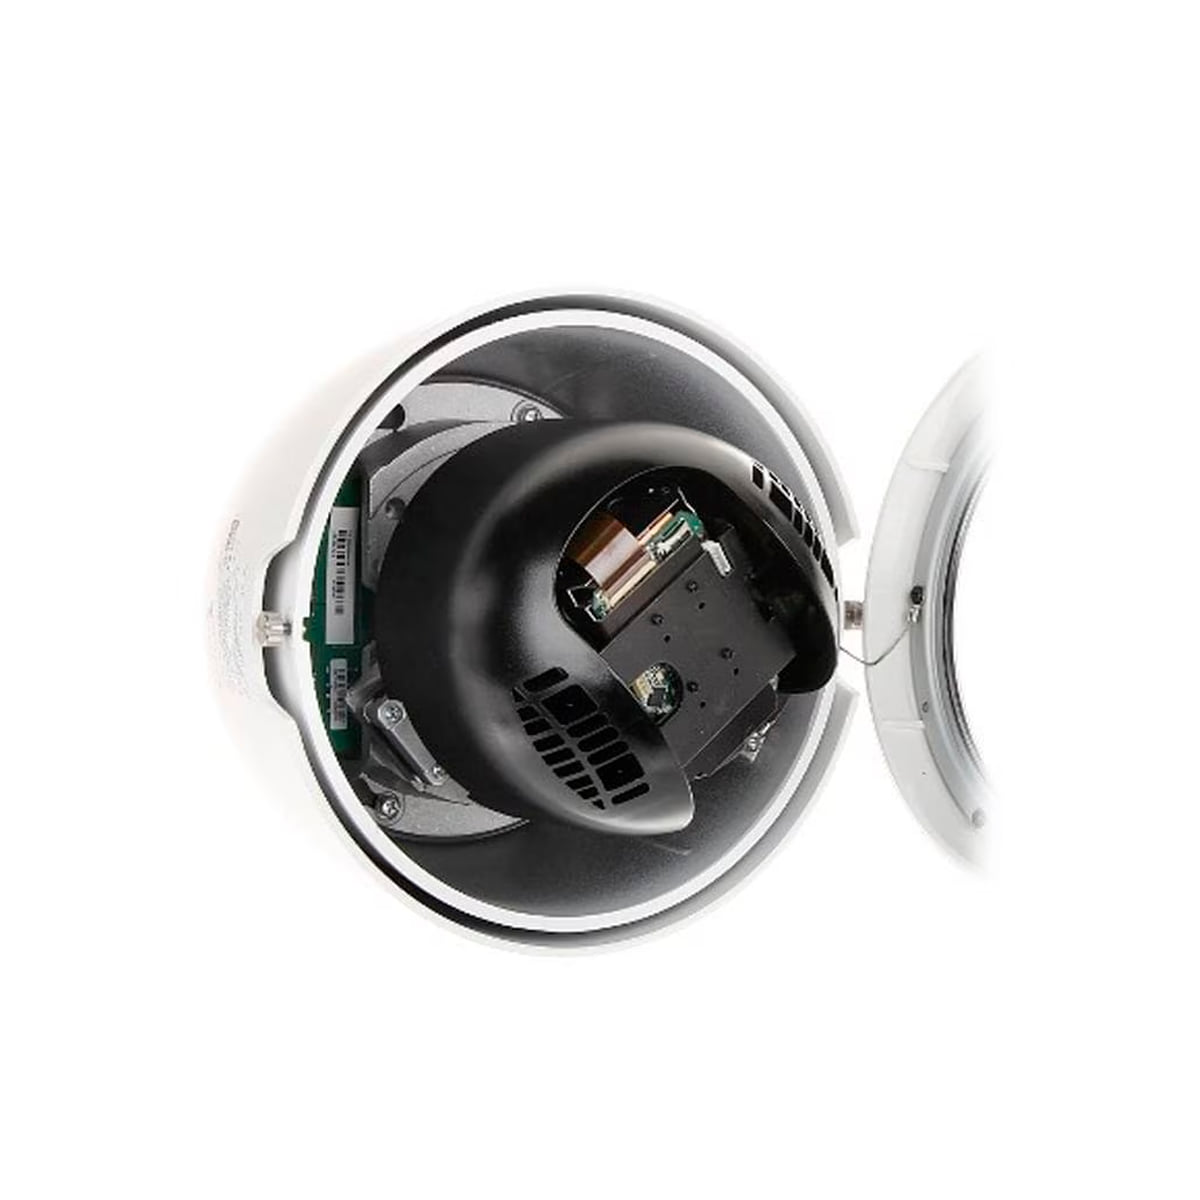 CAMERA-SPEED-DOME-IP-OUTDOOR-PTZ-2MP-30X-DS-2DE5230W-AE_5